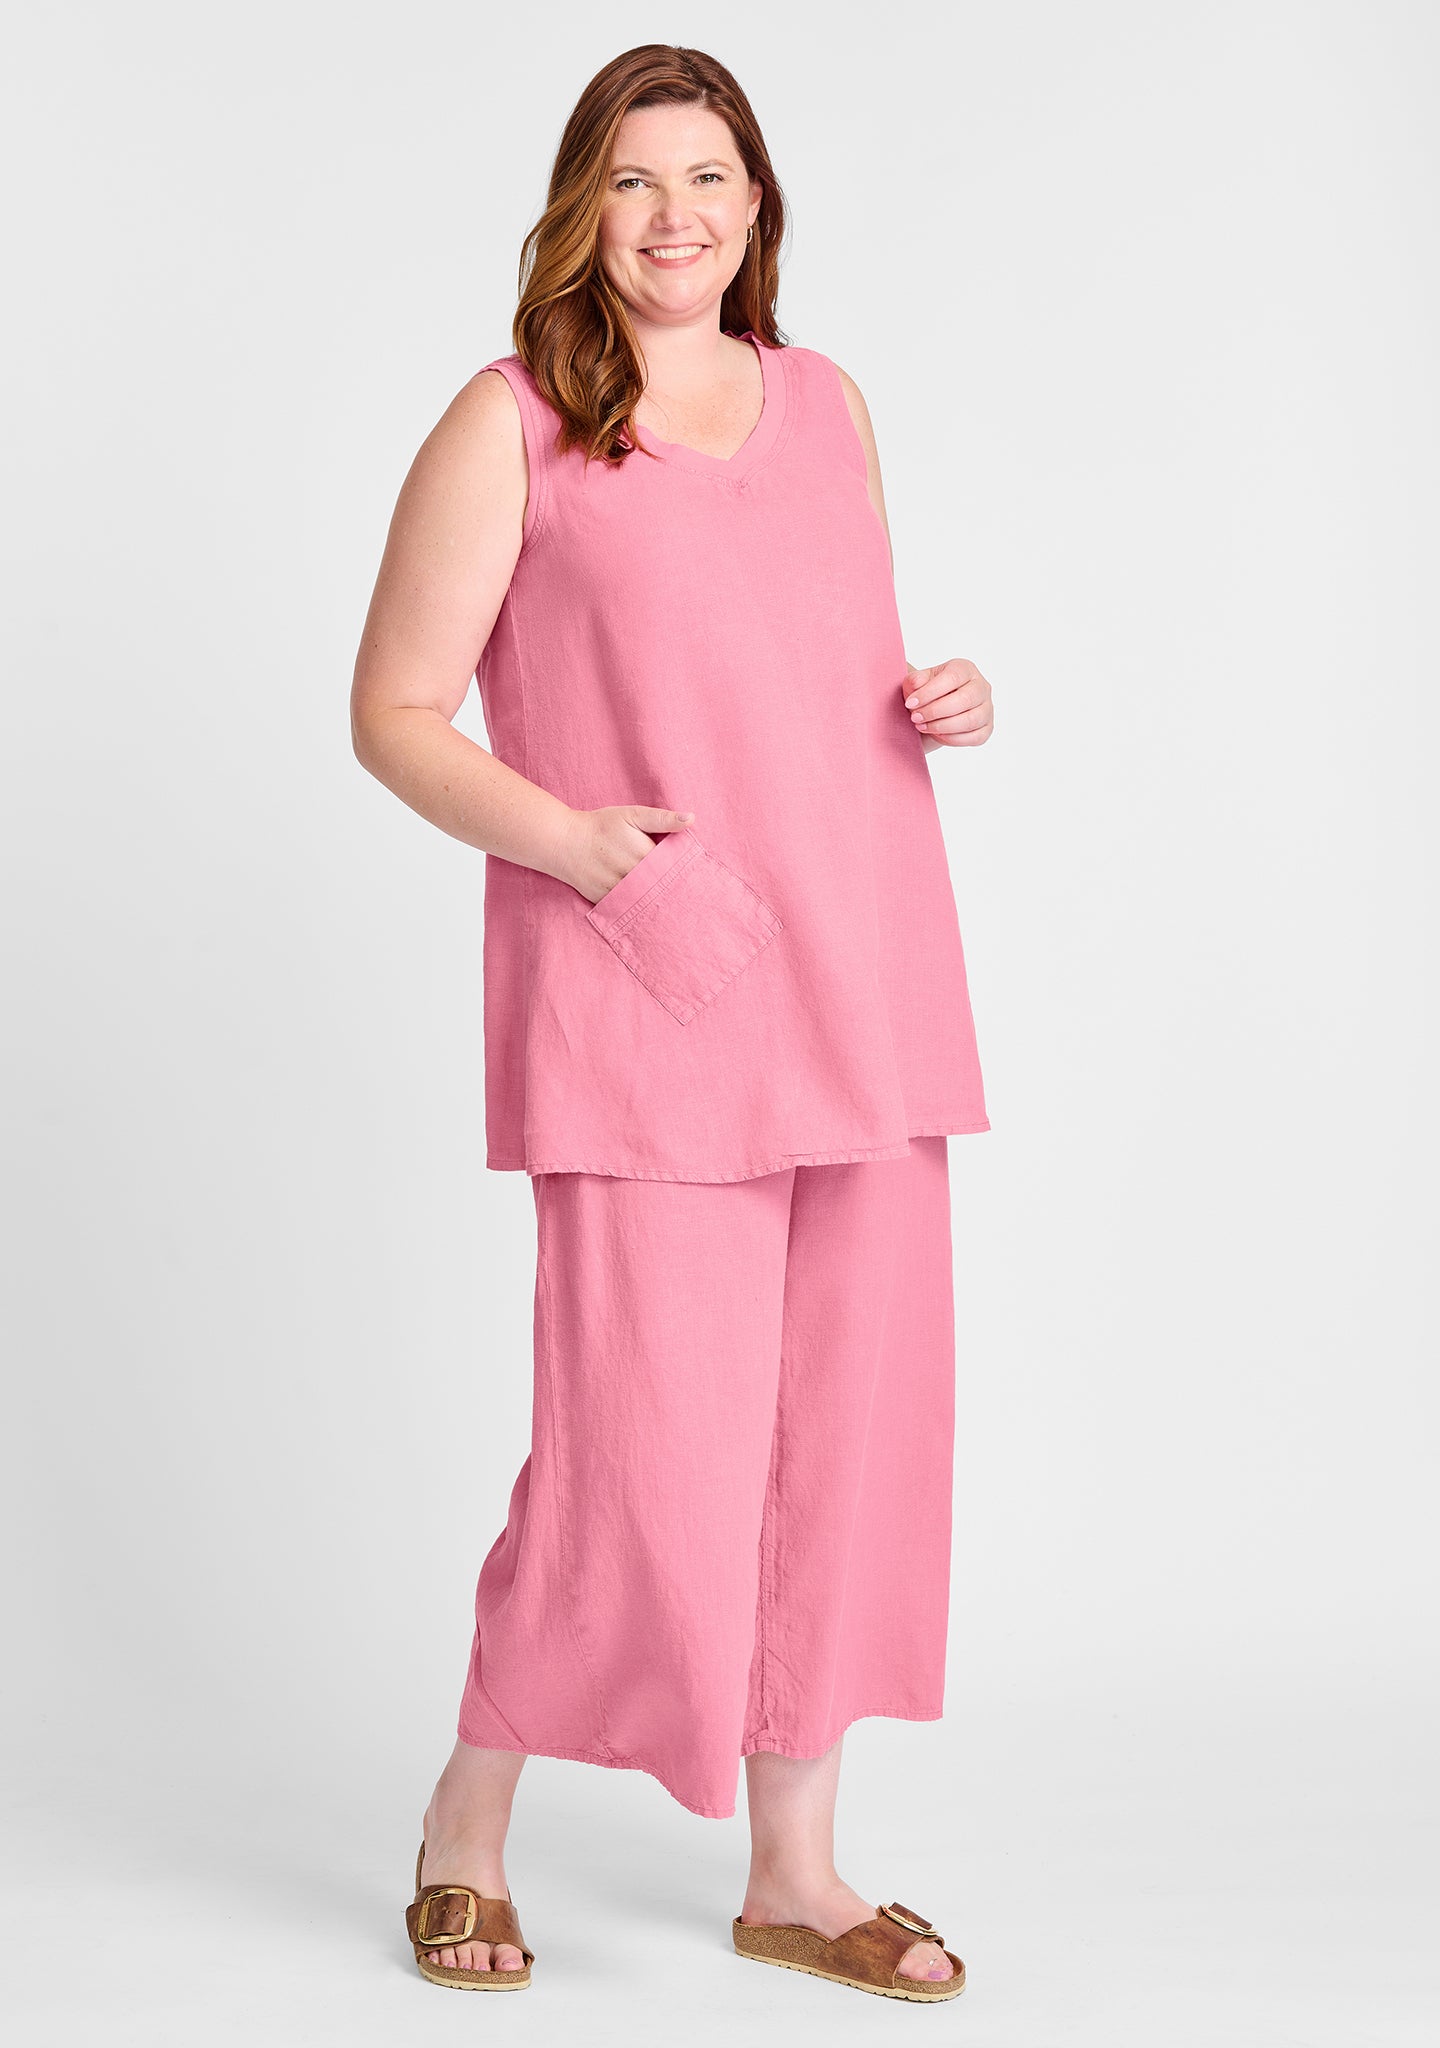 FLAX linen tank in pink with linen pants in pink